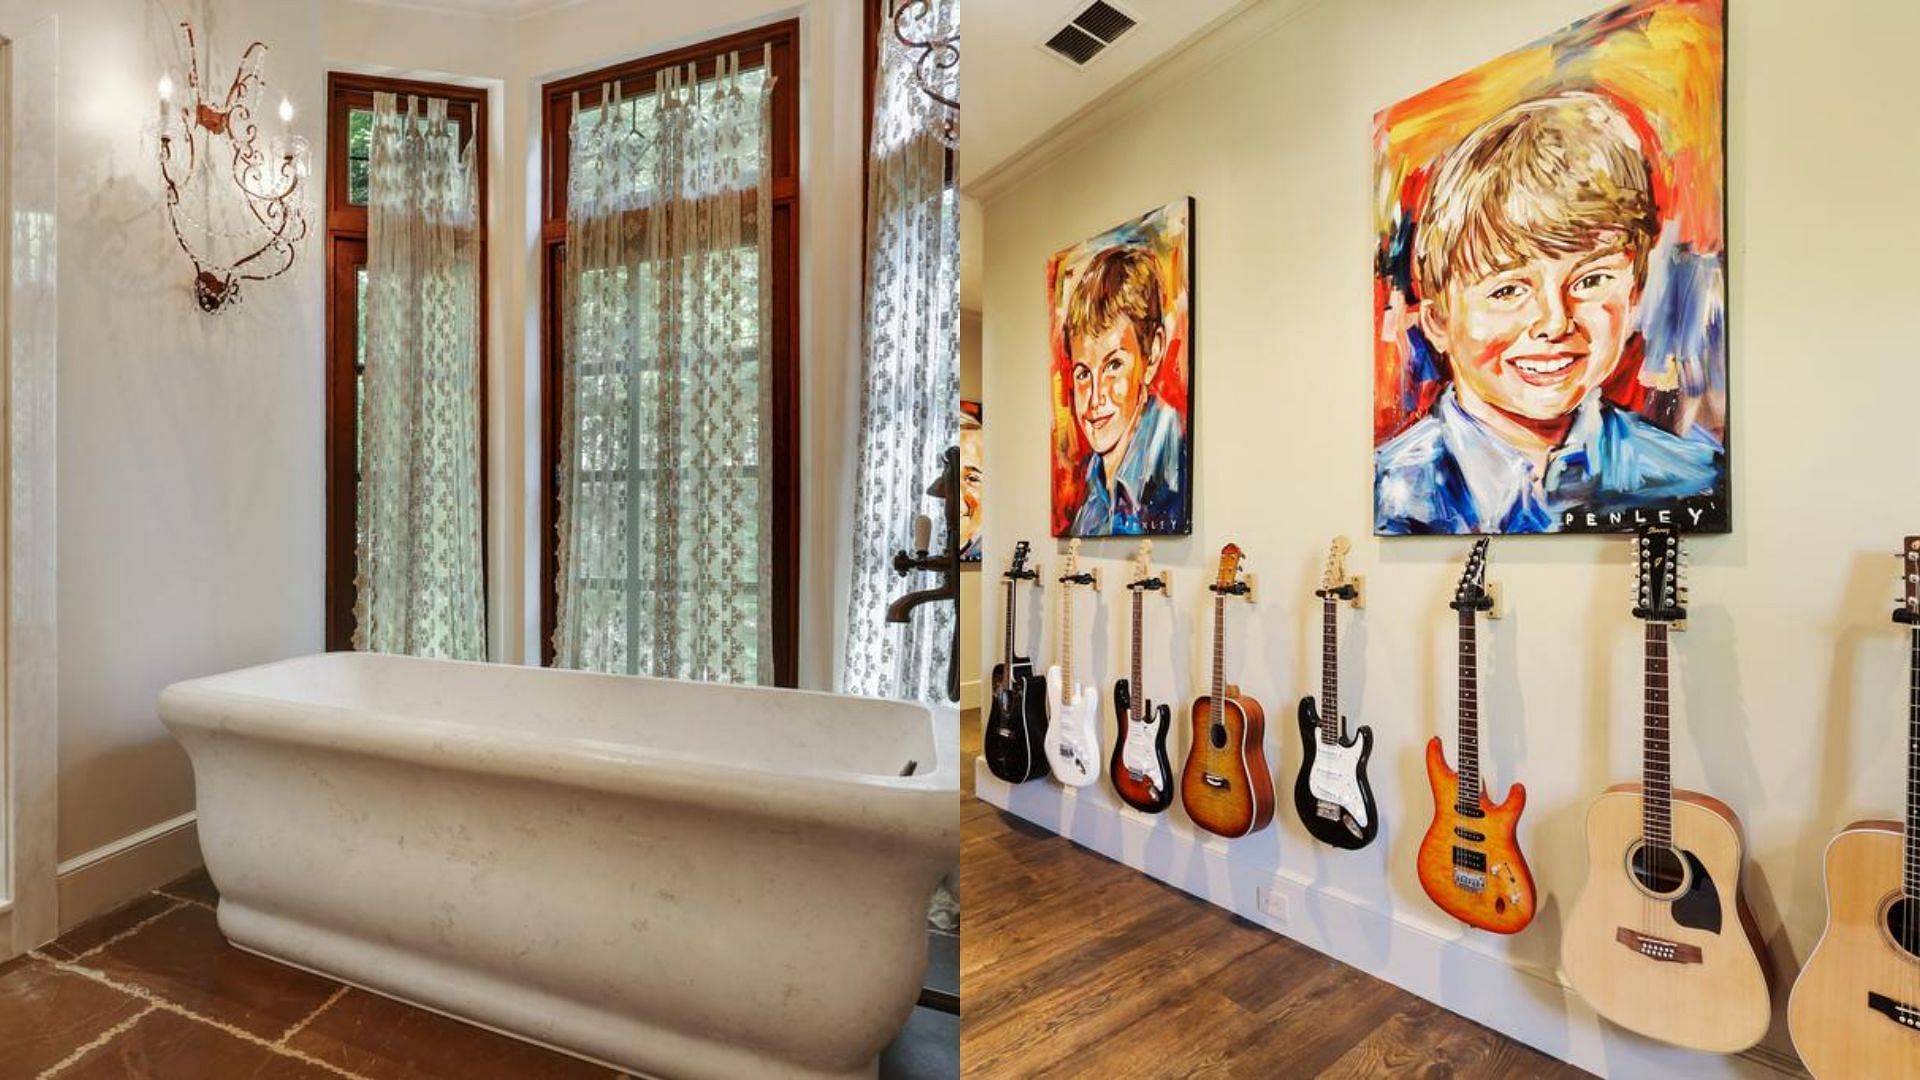 Washroom and Guitar collection inside the mansion